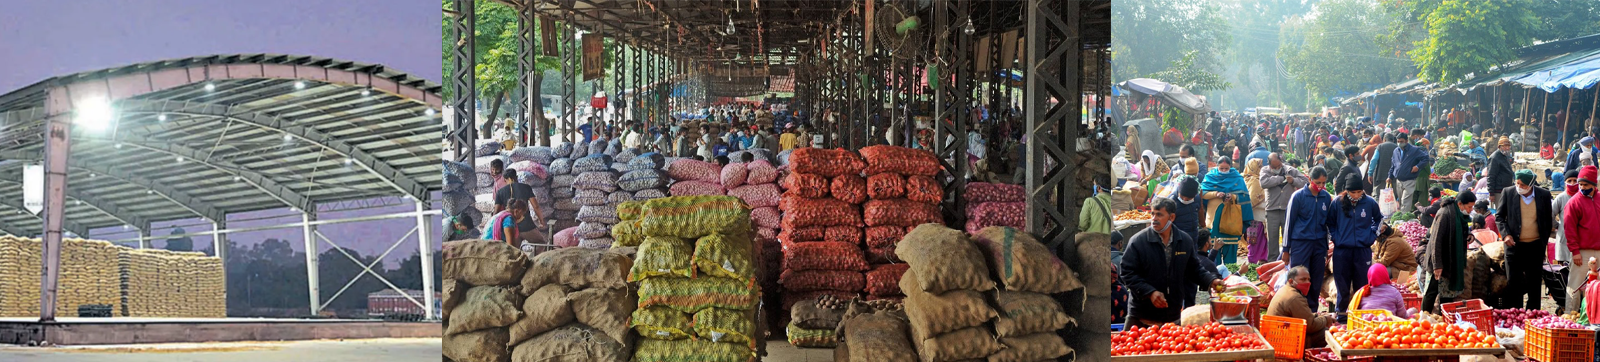 Chandigarh’s Grain Market in Sec 26 to be Finally Shifted to Sector 39